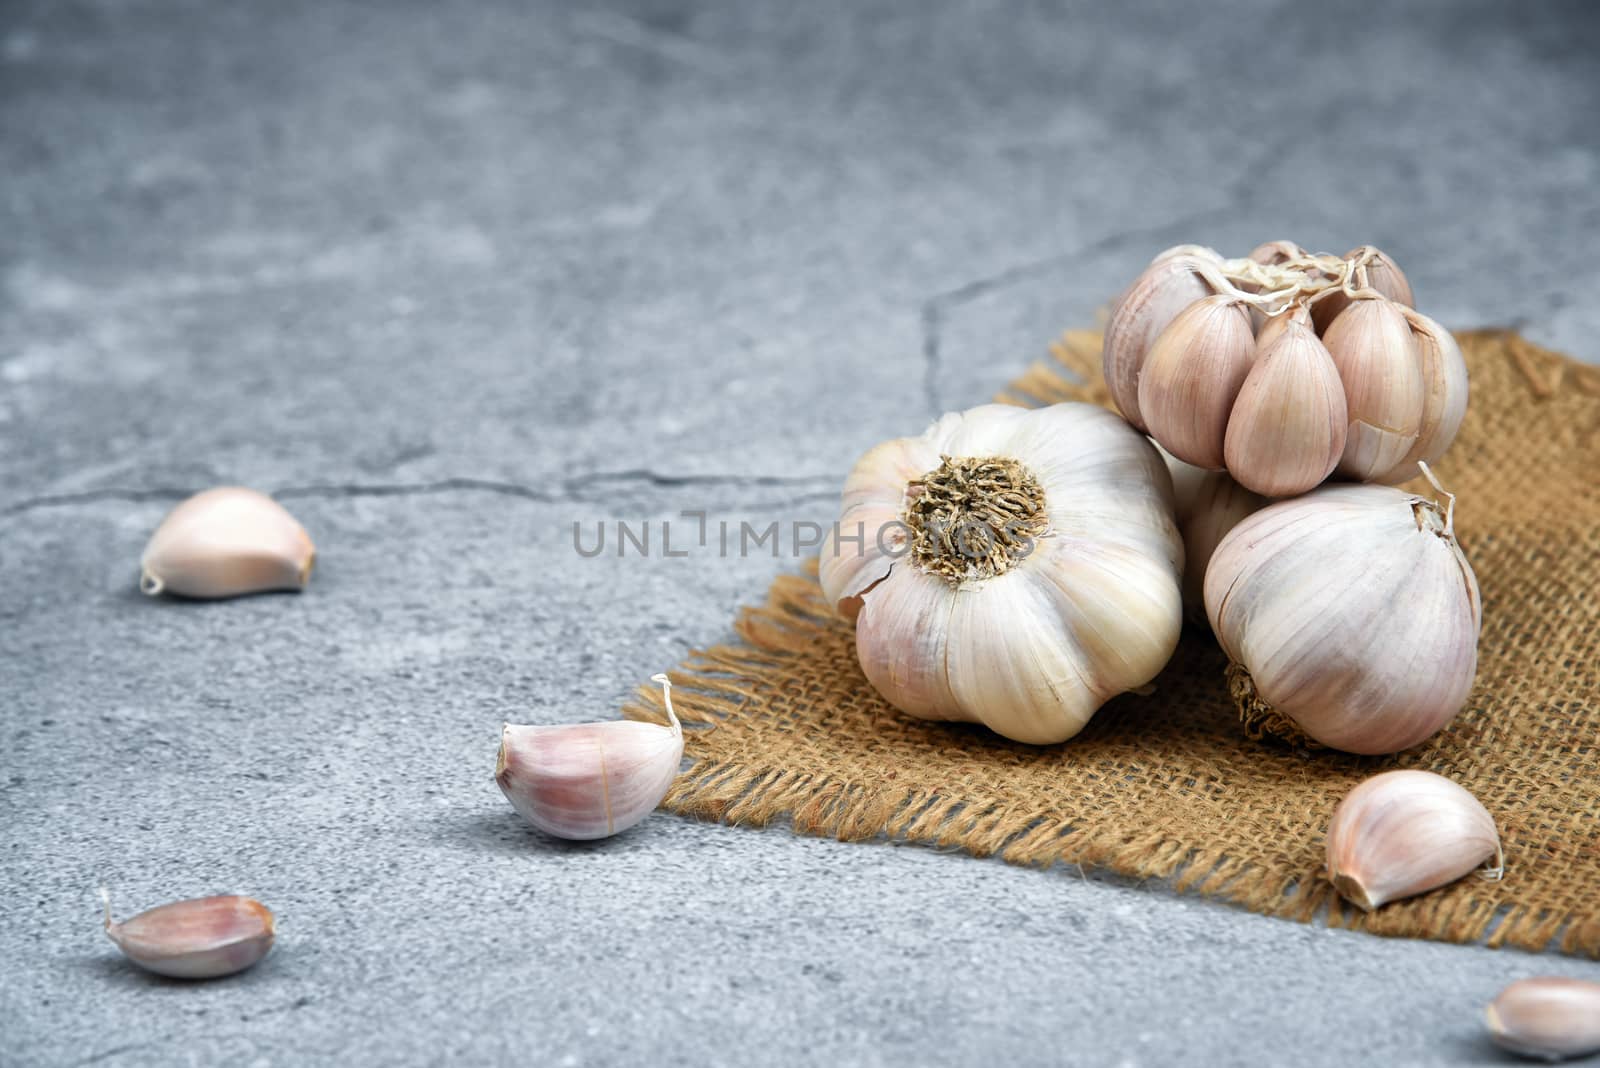 Organic Garlic. Fresh Garlic Cloves and Garlic bulb on jute on dark background with Pile of garlic or spice. Selected focus. Concept of spices for healthy cooking.